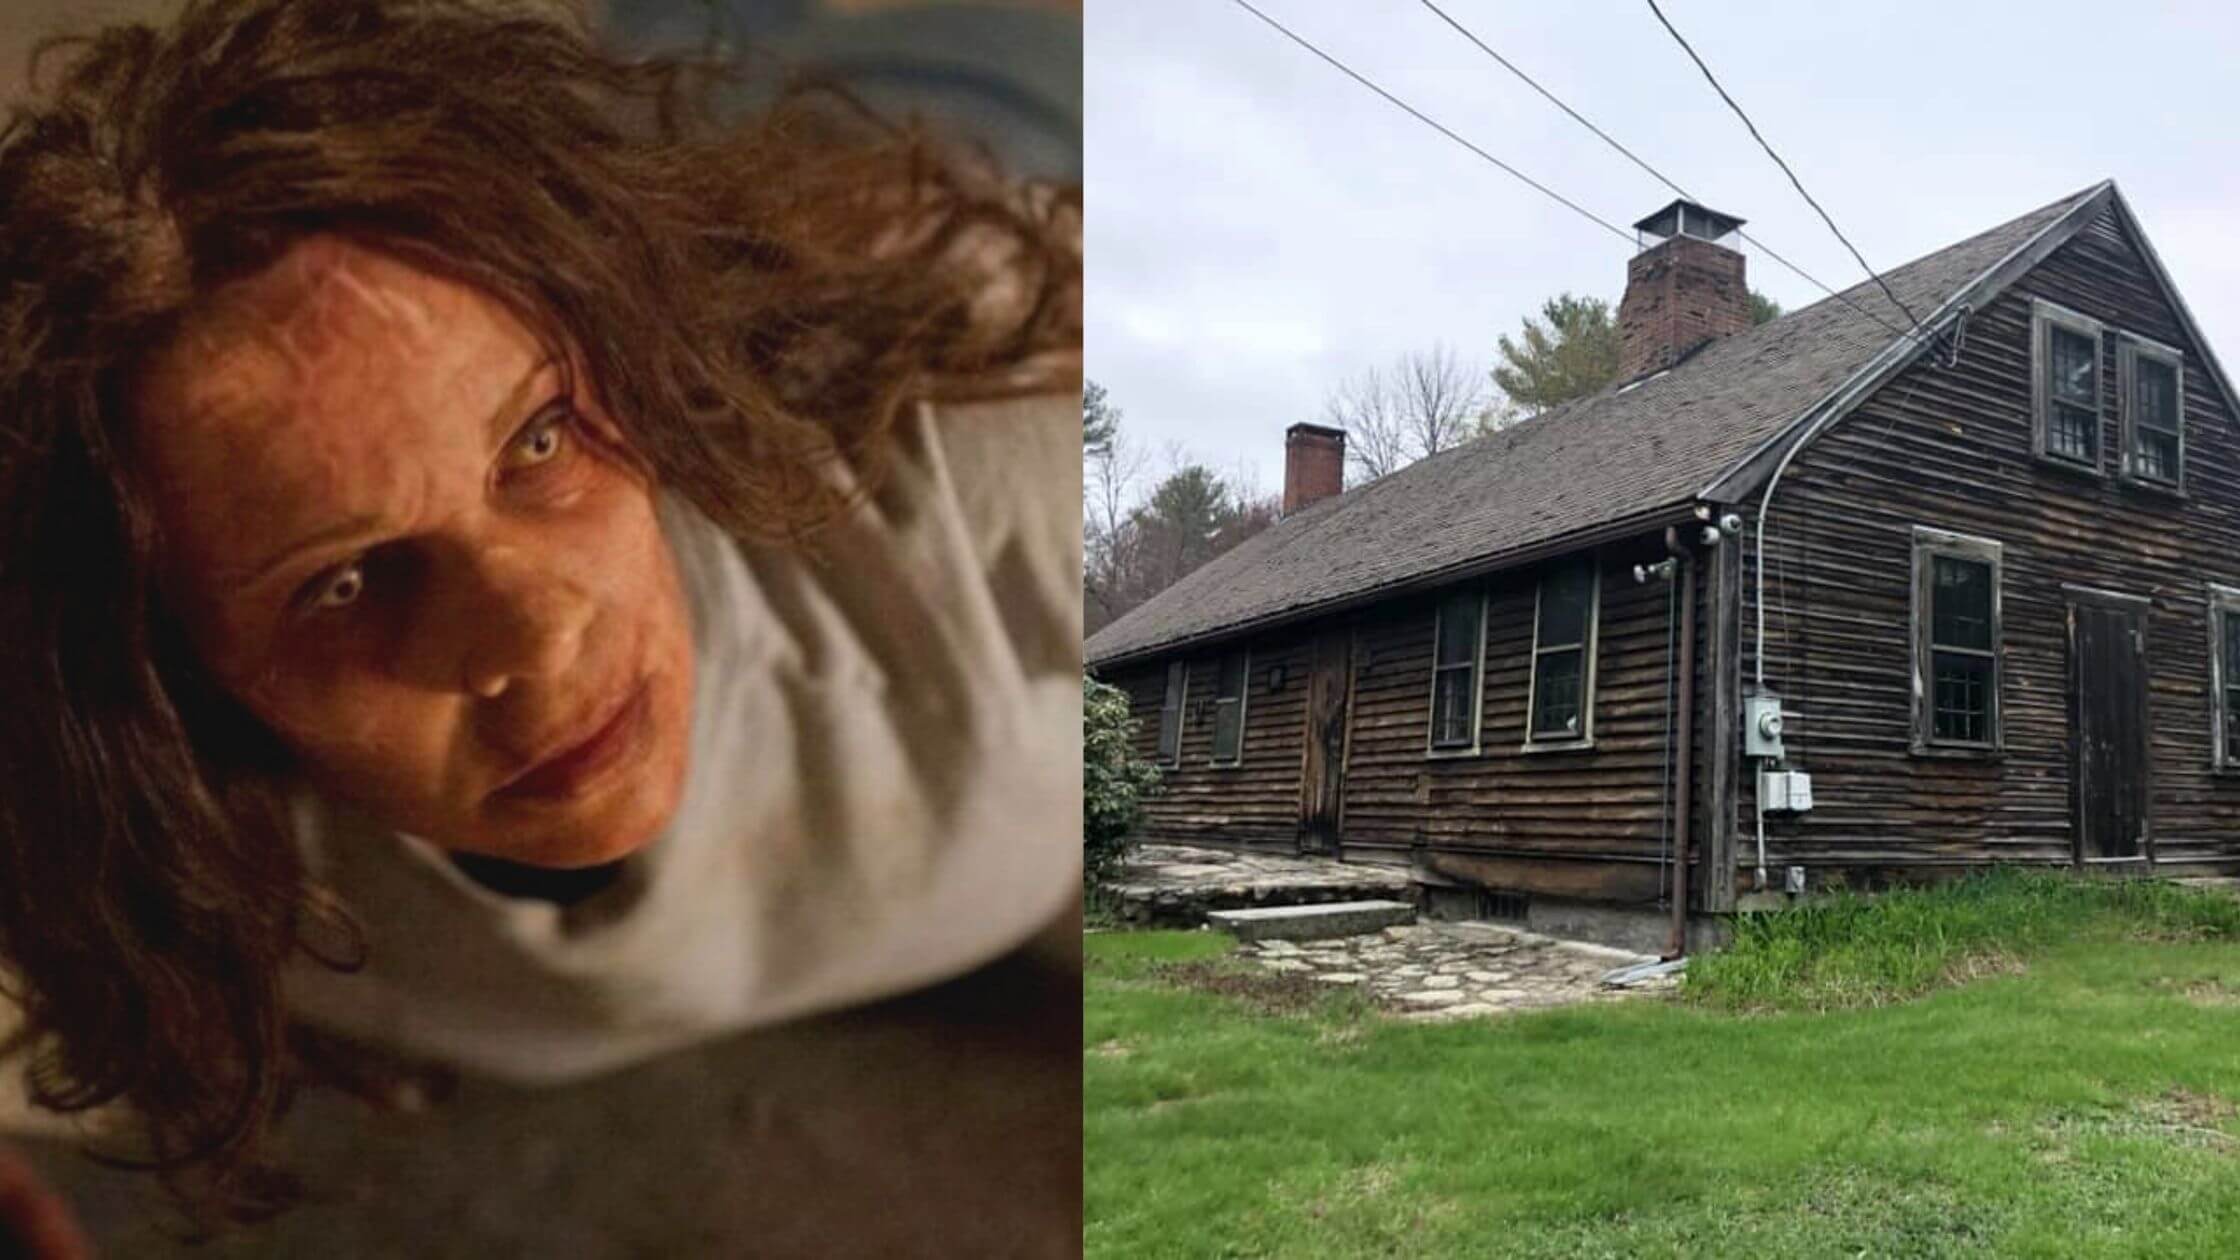 A house that inspired the movie 'The Conjuring' has sold for more than $1.5 million